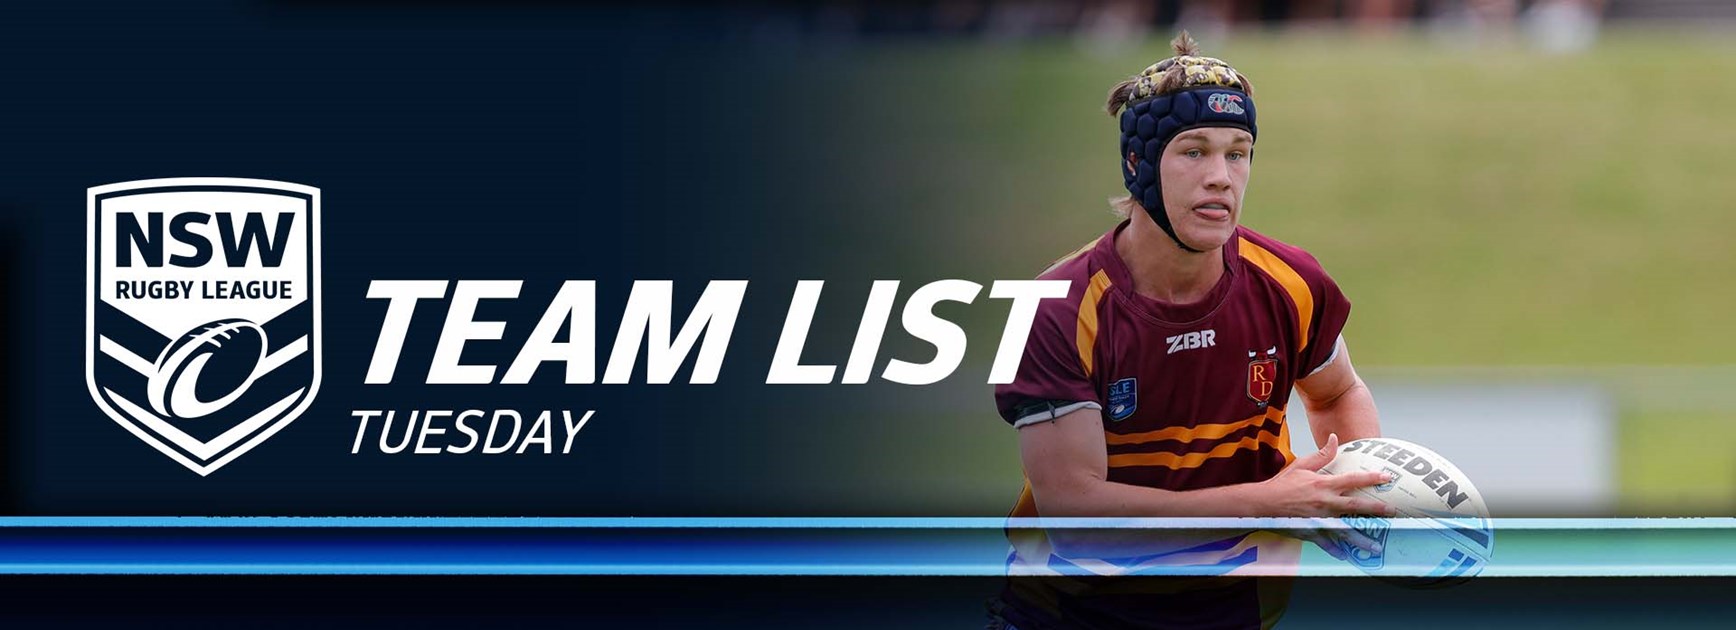 Team List Tuesday | Junior Reps Rd 4 and  Country Champs kick-off